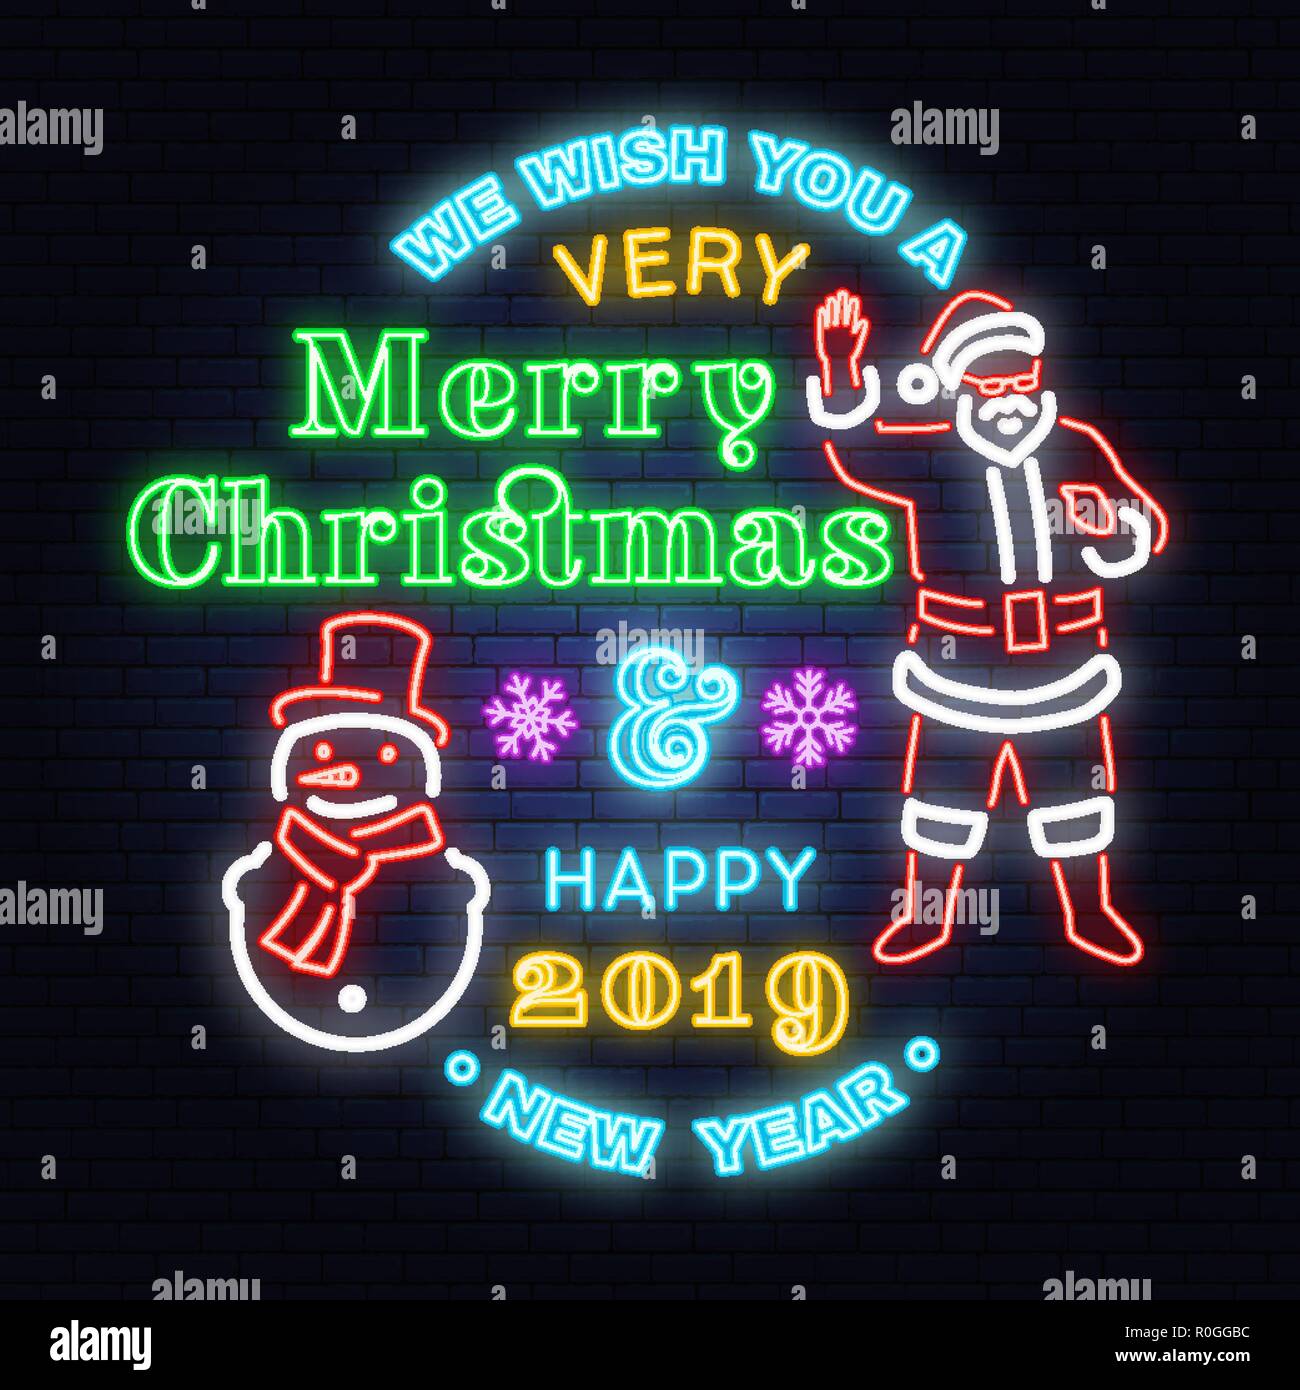 We wish you a very Merry Christmas and Happy New Year neon sign with snowman and Santa Claus. Vector. Neon design for xmas, new year emblem, bright signboard, light banner. Night signboard Stock Vector